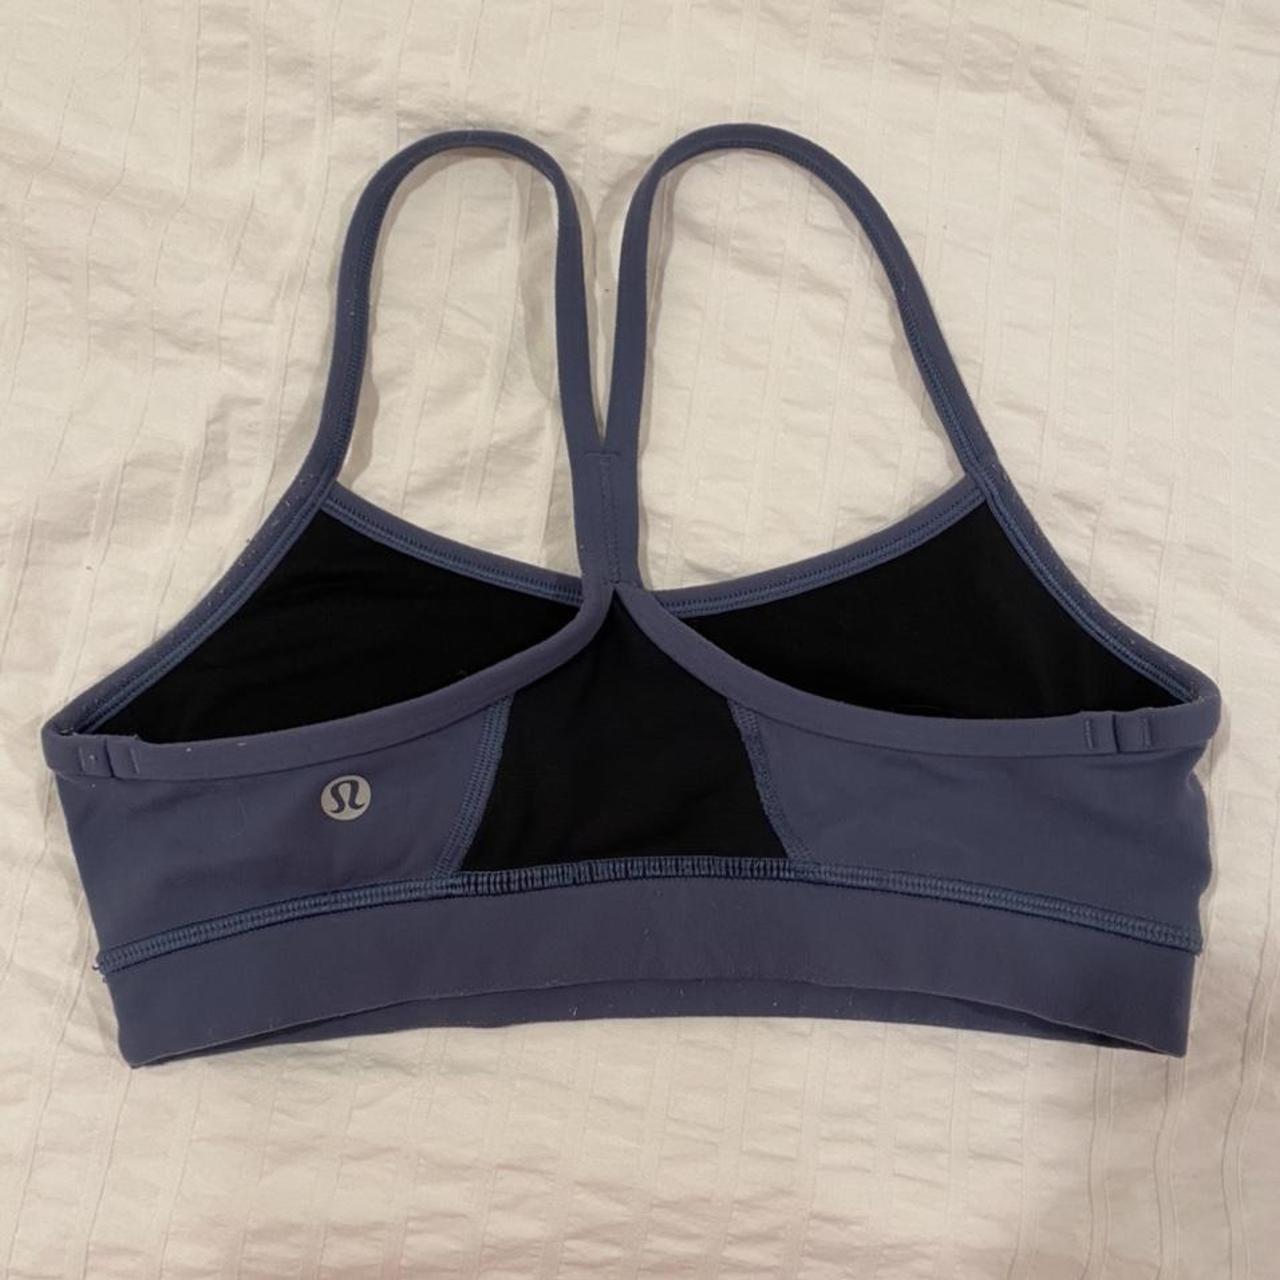 lululemon Y back sports bra there's for tag on this - Depop